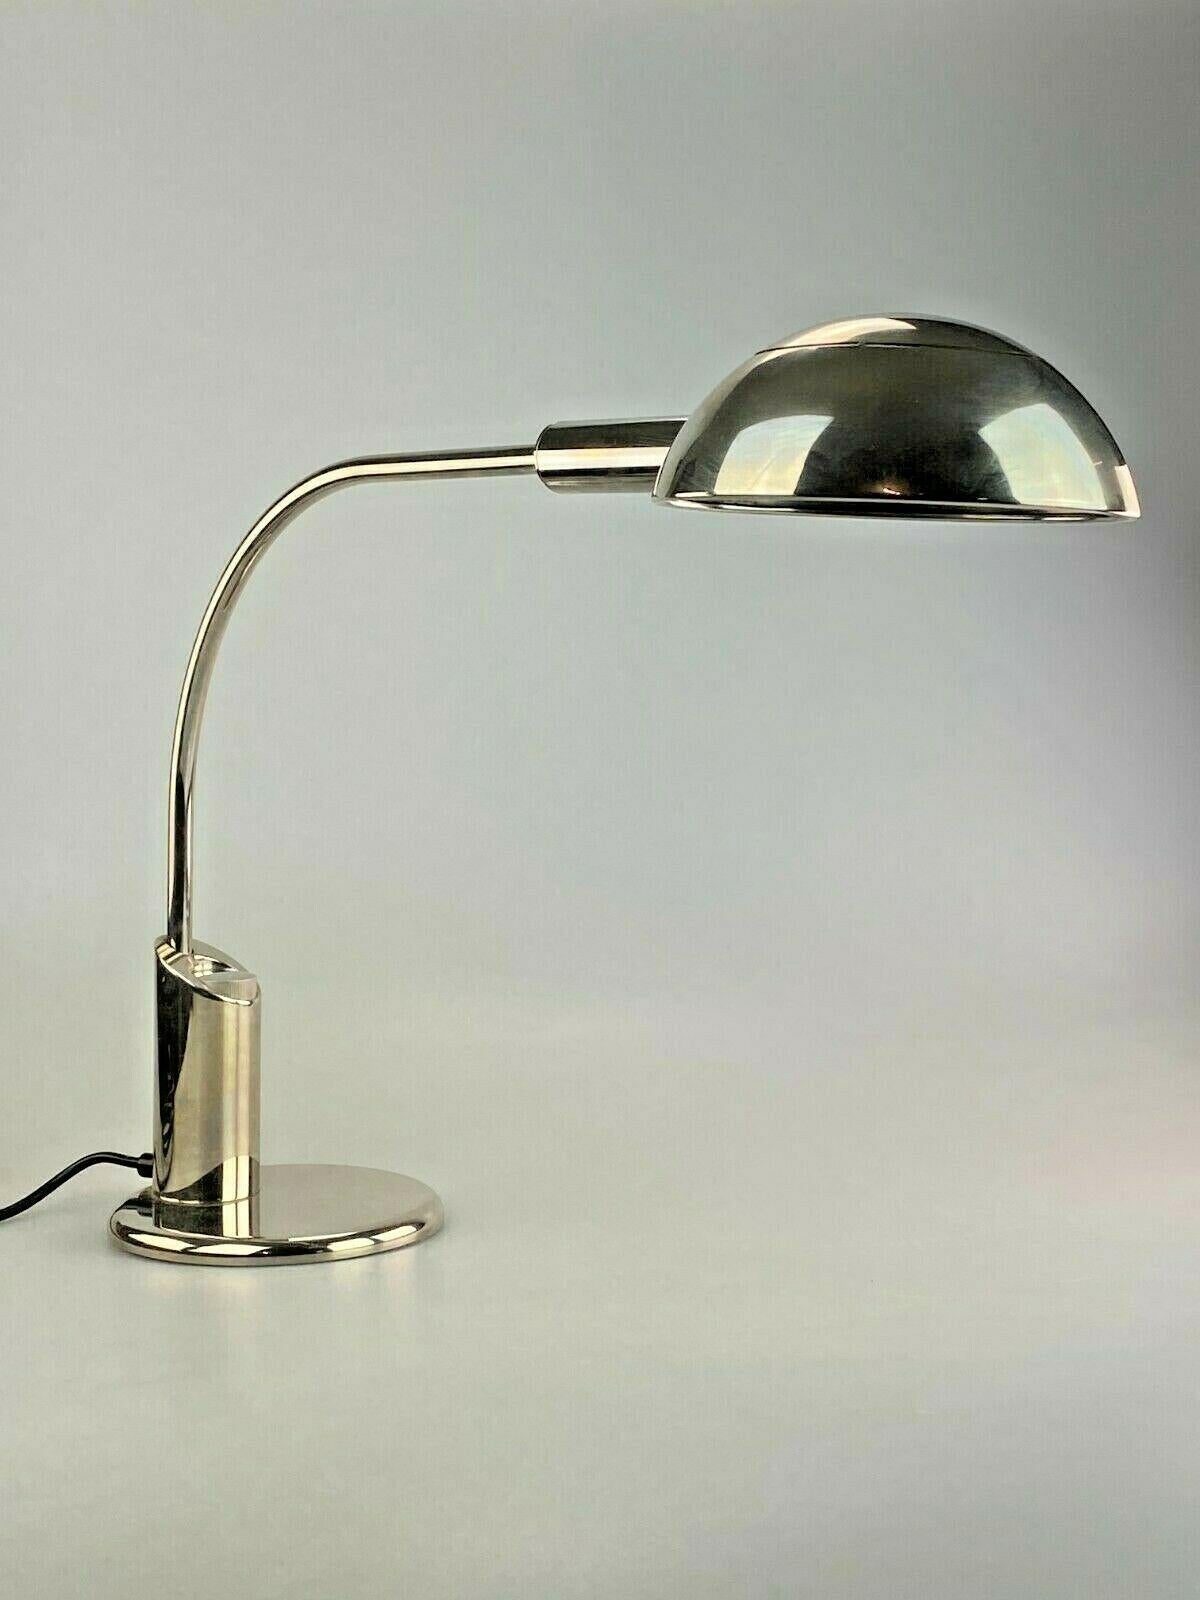 60s 70s lamp light table lamp Florian Schulz desk lamp chrome

Object: desk lamp

Manufacturer: Florian Schulz

Condition: good

Age: around 1960-1970

Dimensions:

63cm x 17.5cm x 39cm

Other notes:

Shipping without bulbs

The